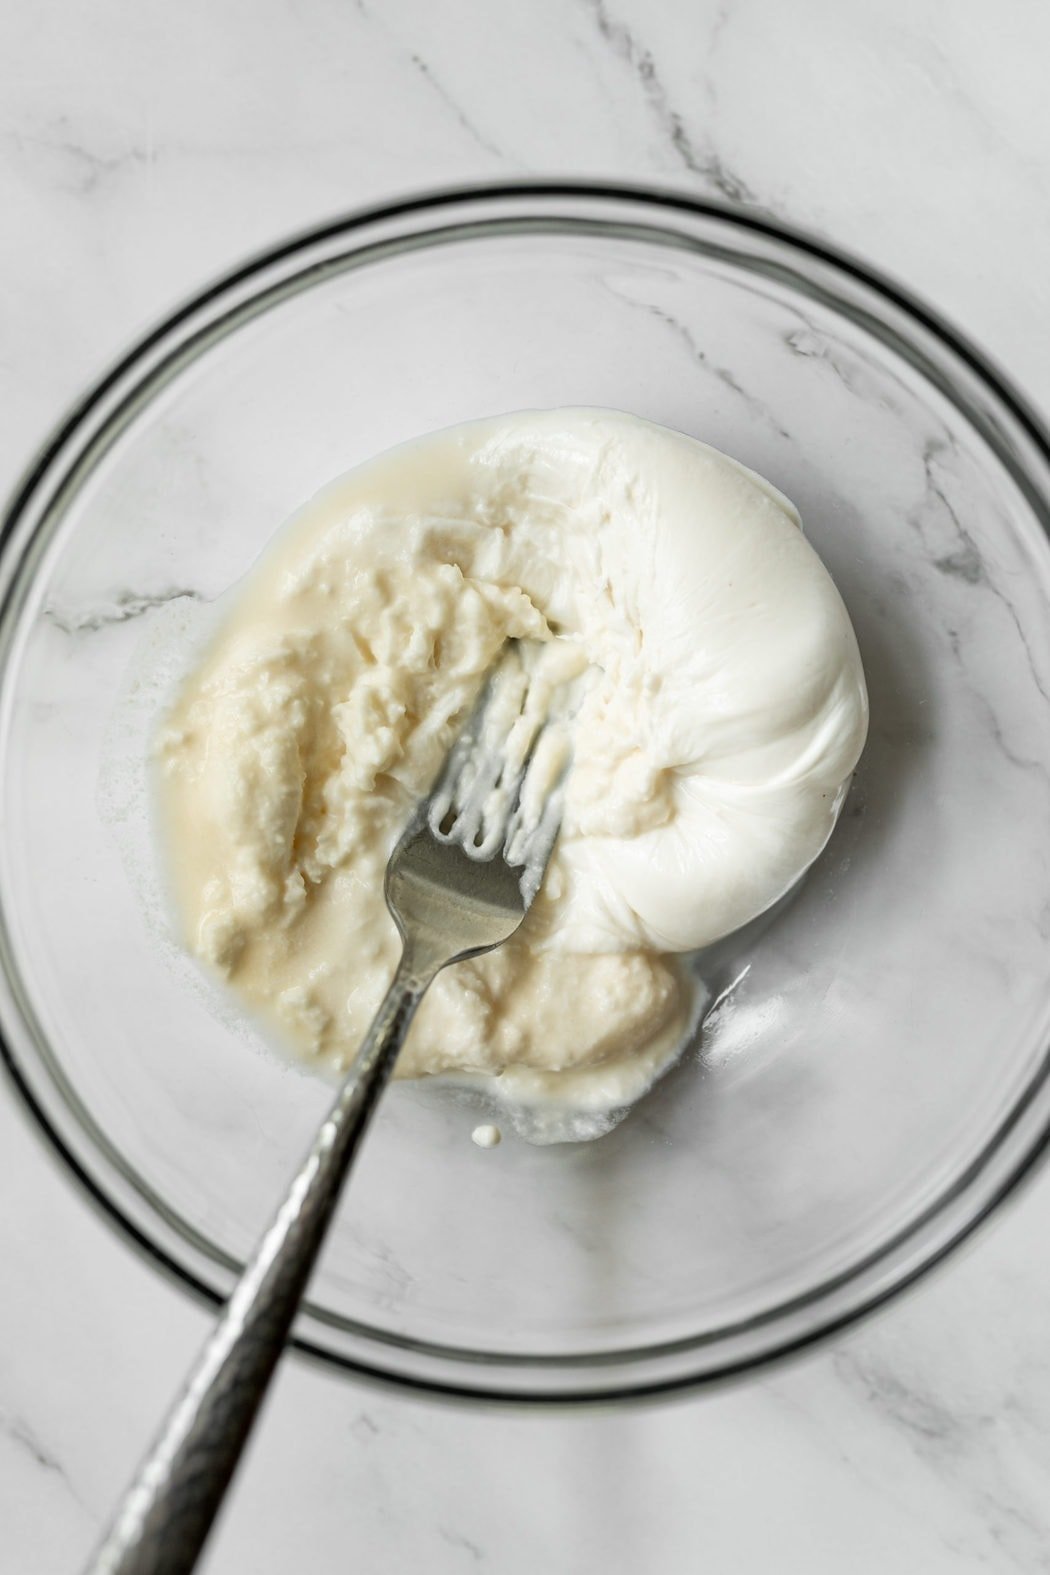 A ball of burrata being mashed with a fork in a mixing bowl